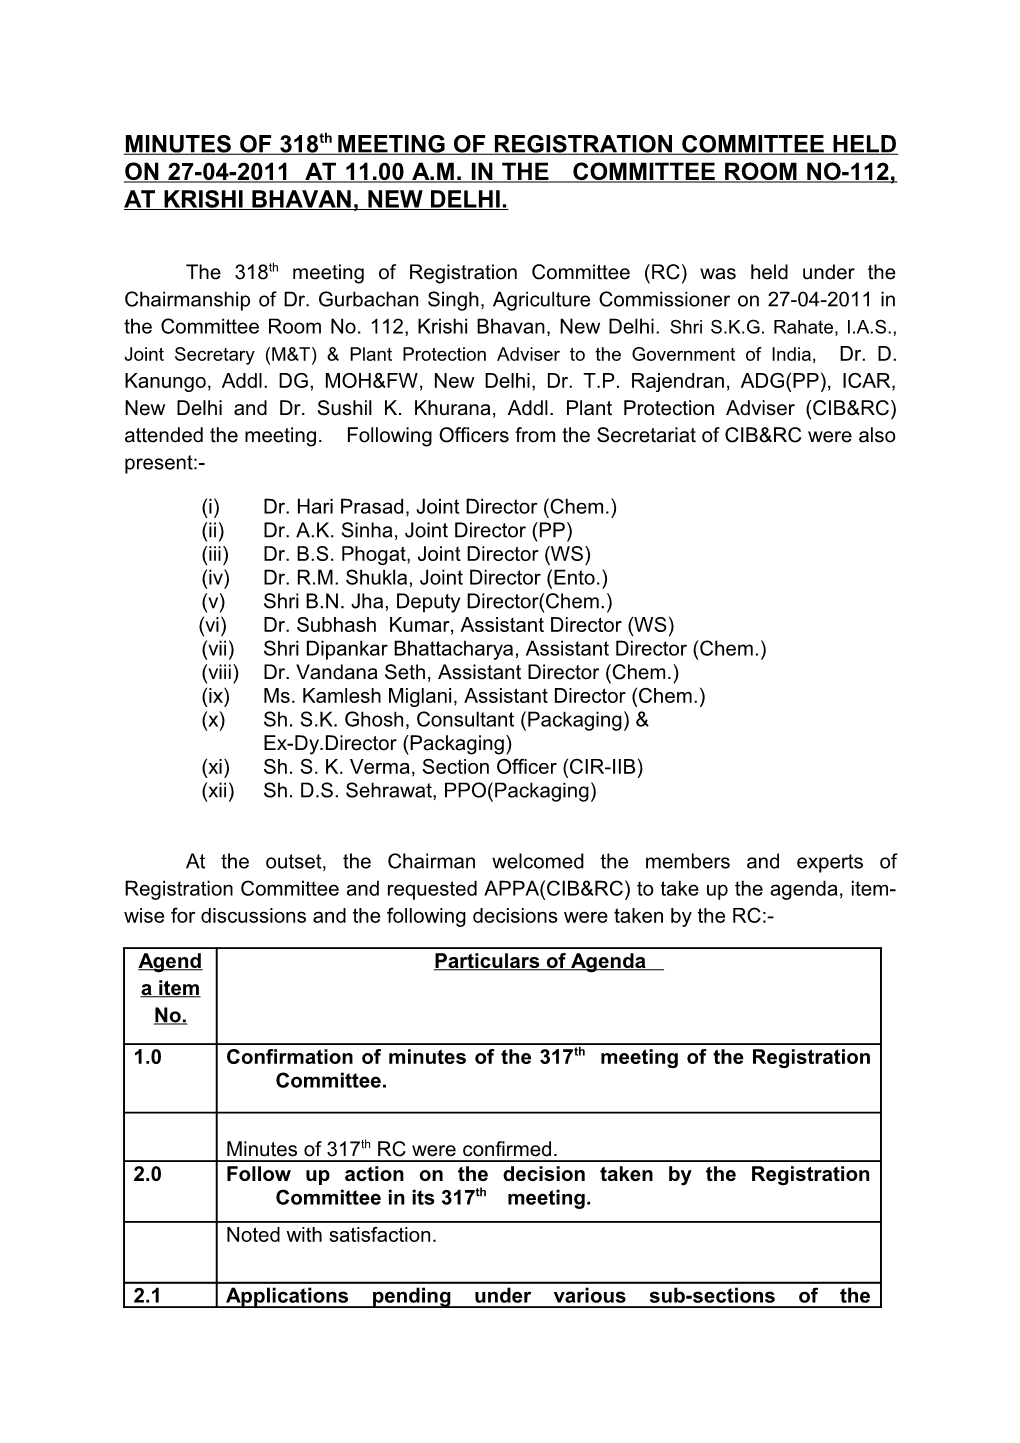 MINUTES of 318Th MEETING of REGISTRATION COMMITTEE HELD on 27-04-2011 at 11.00 A.M. IN